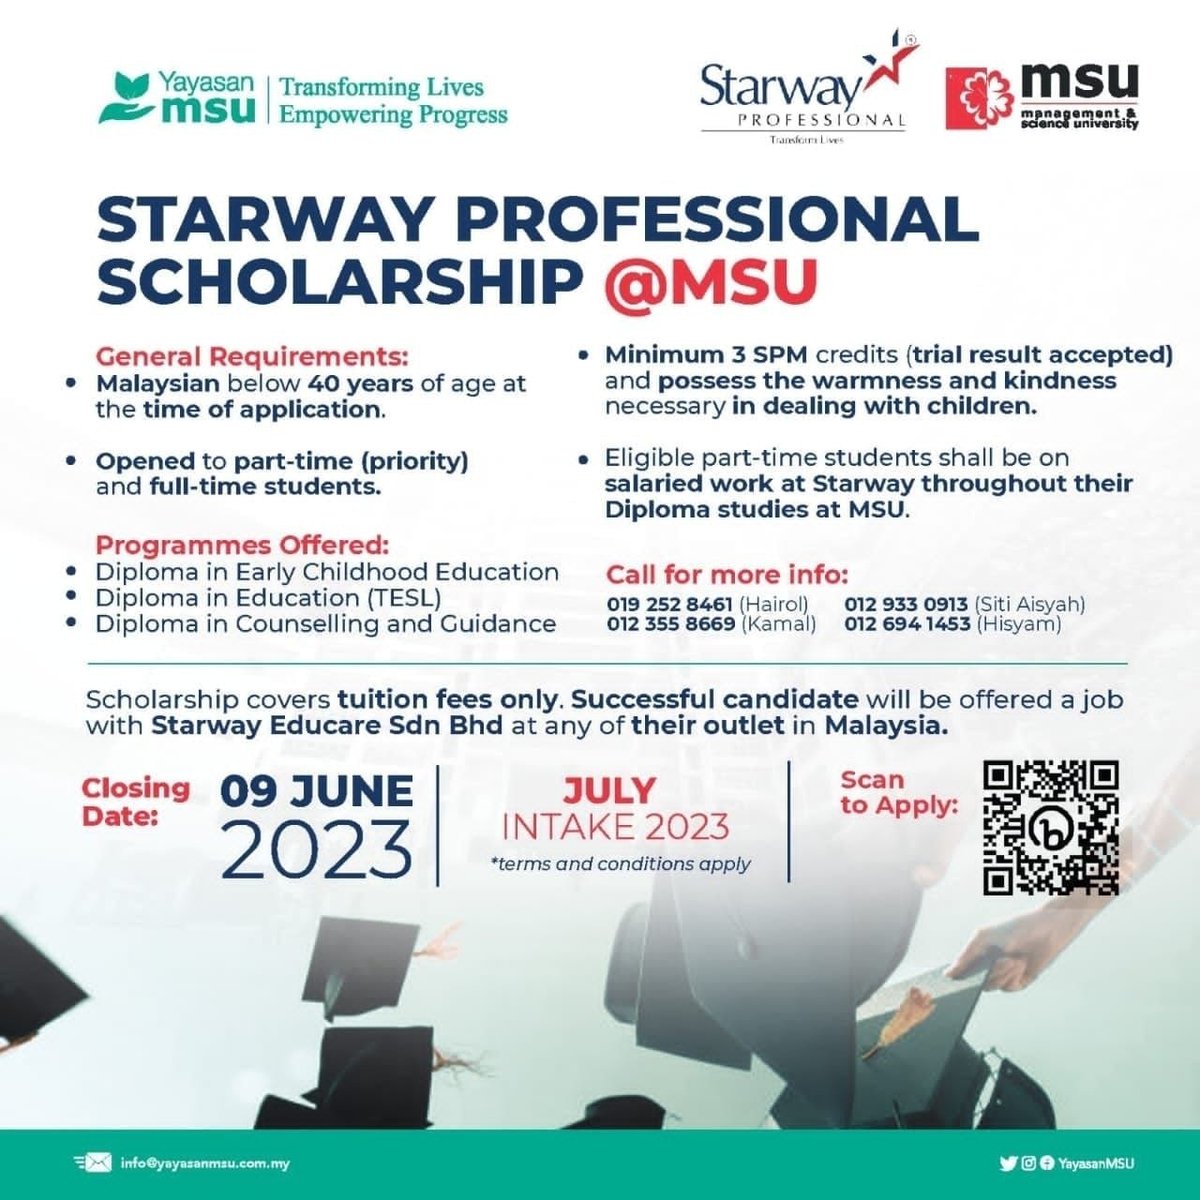 𝐒𝐂𝐇𝐎𝐋𝐀𝐑𝐒𝐇𝐈𝐏𝐒 𝐅𝐎𝐑 𝐘𝐎𝐔!! Last call for Starway Scholarship for July Intake 2023. Don't miss the chance. Apply now 👉 bit.ly/3EXx8C8 #Scholarships #SPM2022